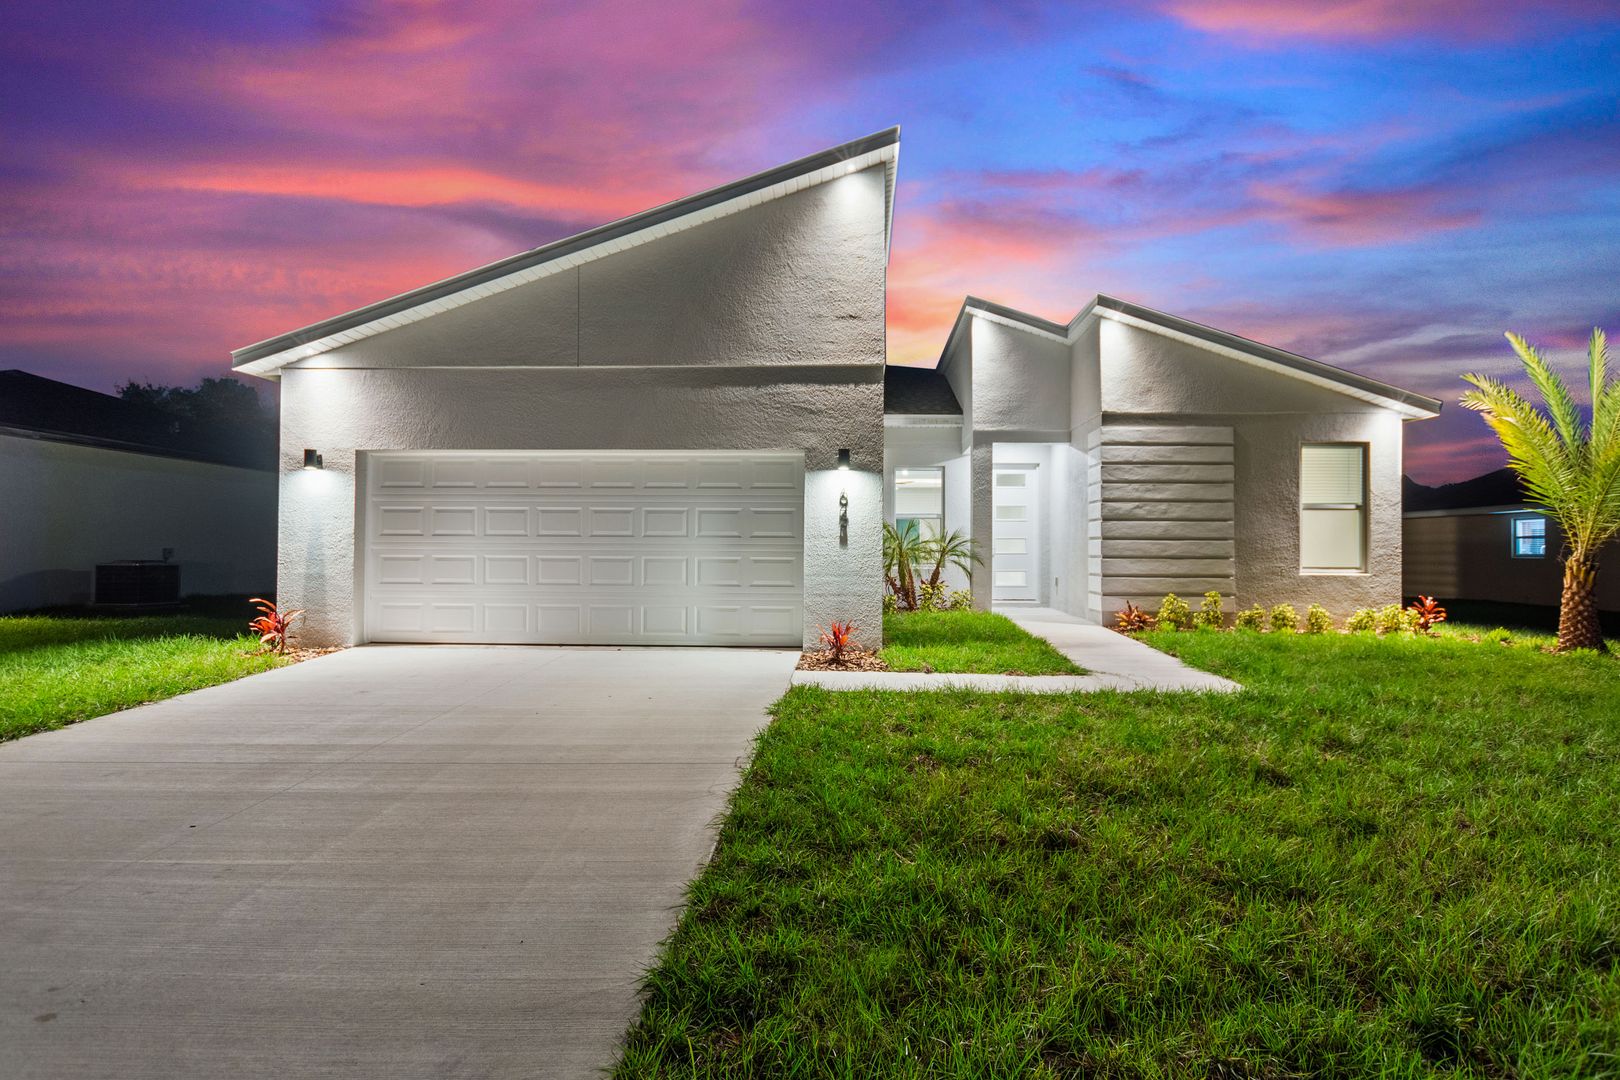 Newly Built Home! Modern, energy efficient home with ALL of the upgrades!